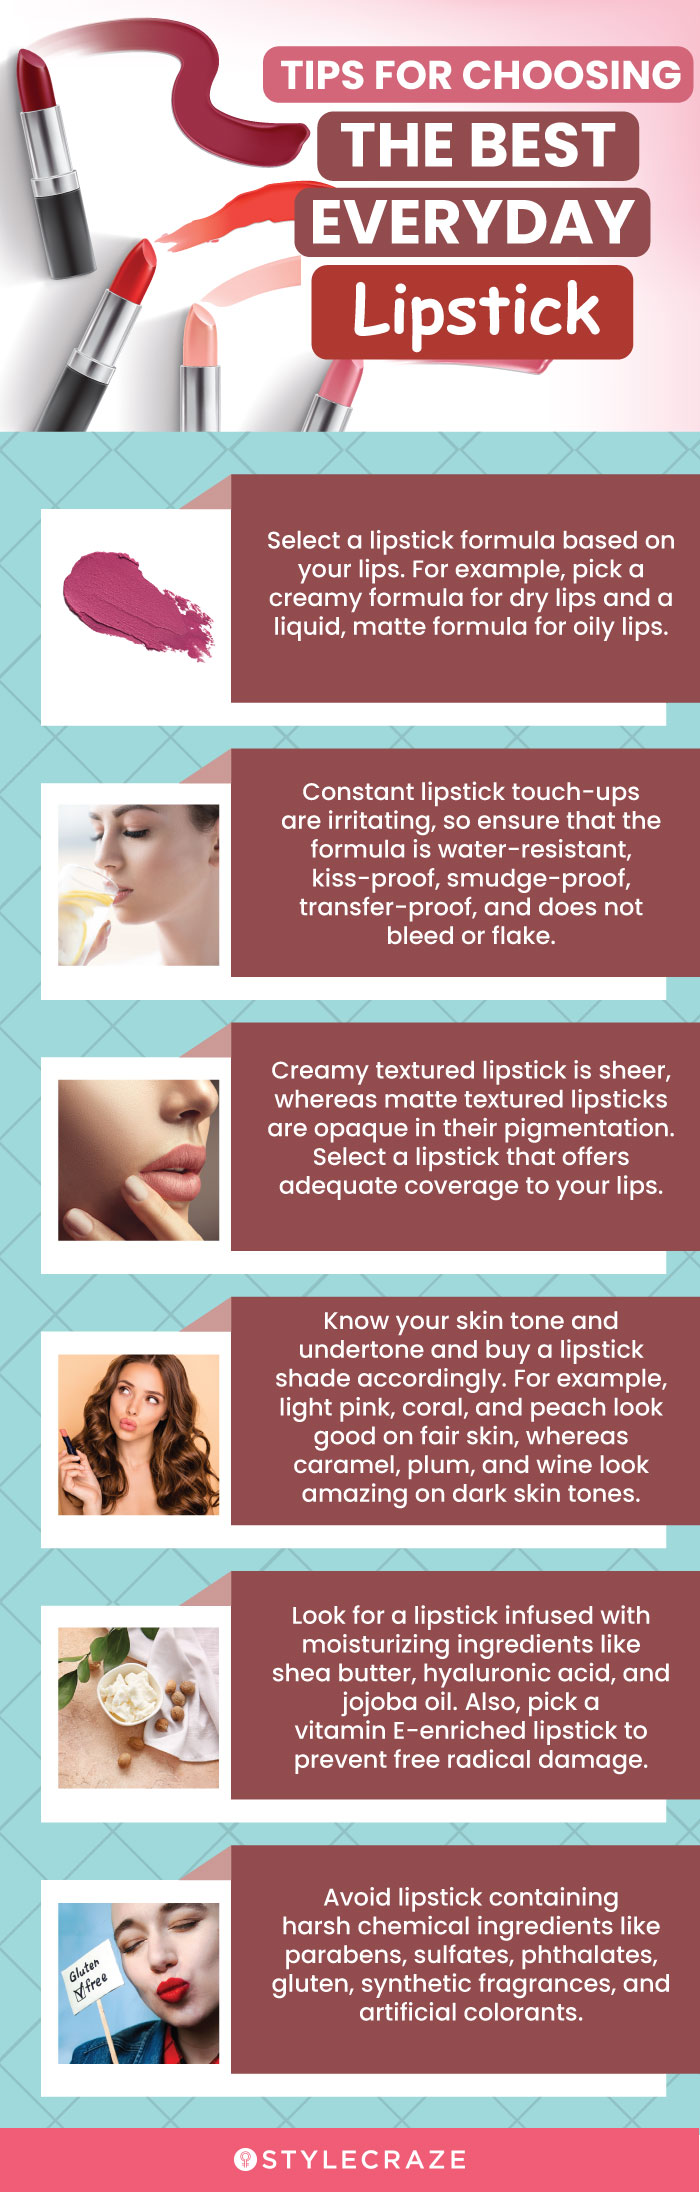 Tips For Choosing The Best Everyday Lipstick (infographic)